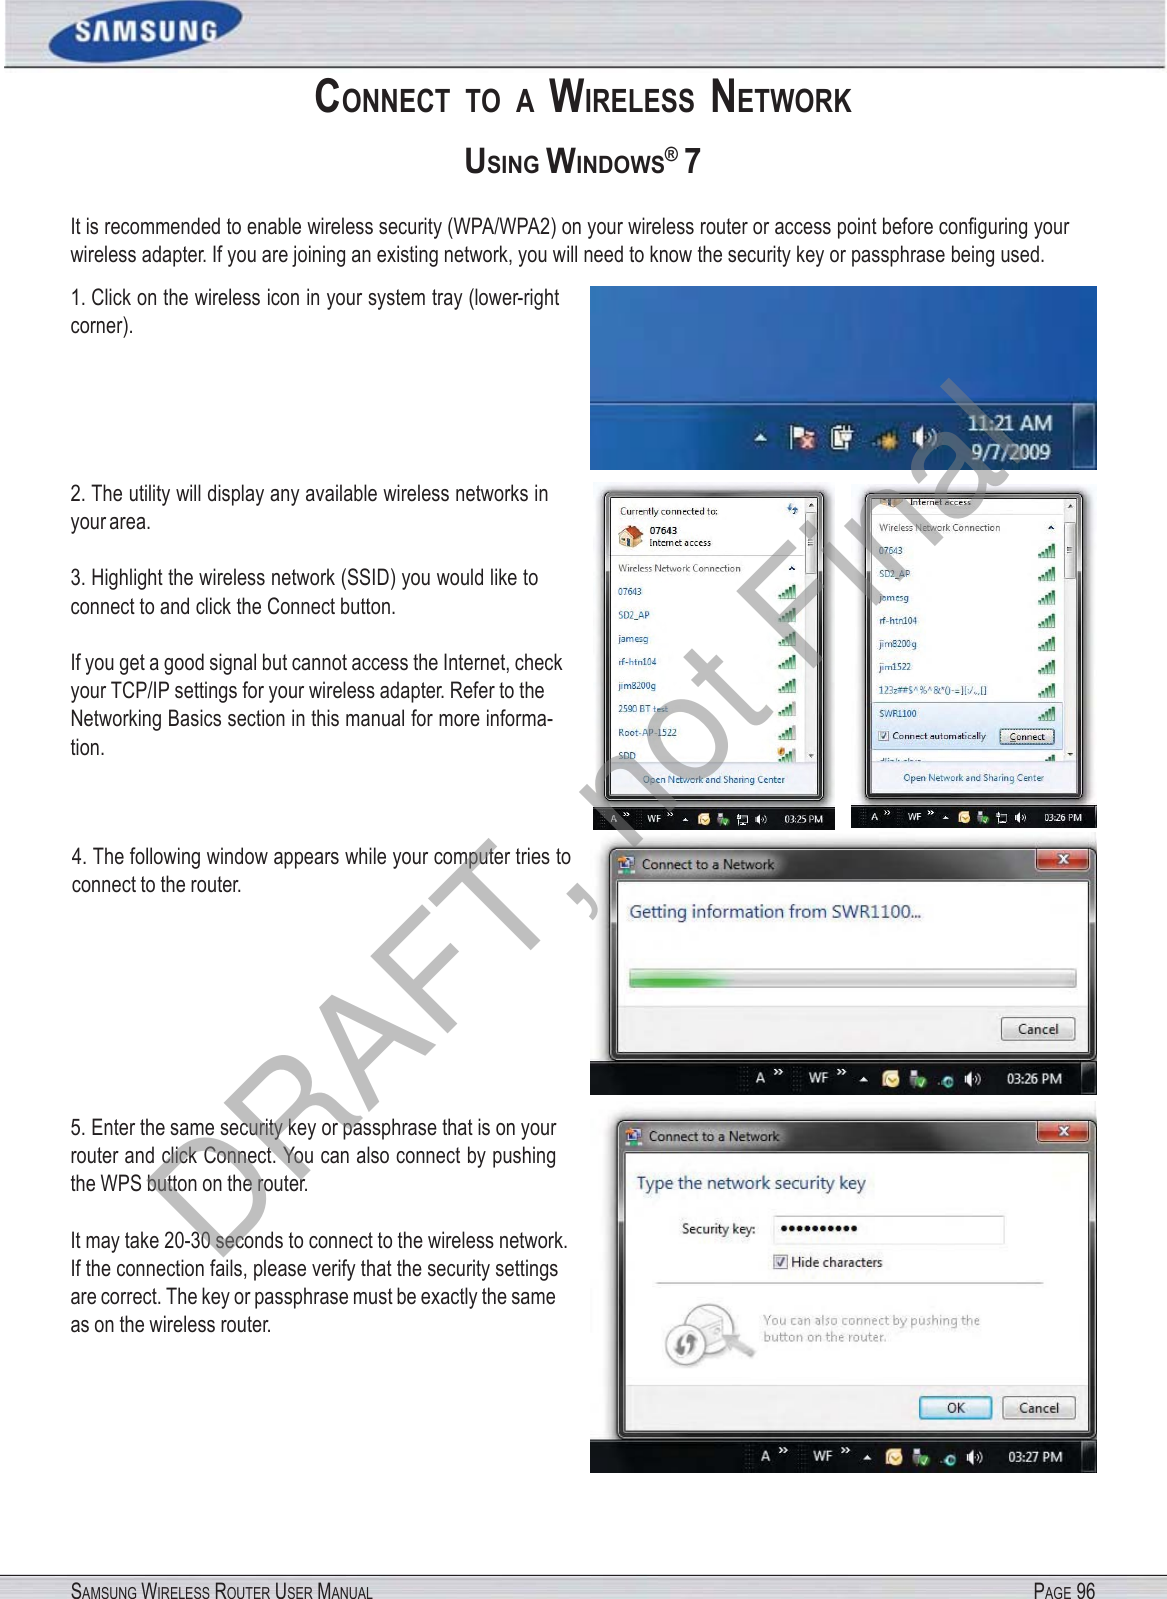 SAMSUNG WIRELESS ROUTER USER MANUAL PAGE 96CONNECT  TO  A  WIRELESS  NETWORK USING WINDOWS® 7 It is recommended to enable wireless security (WPA/WPA2) on your wireless router or access point before conﬁguring your wireless adapter. If you are joining an existing network, you will need to know the security key or passphrase being used. 1. Click on the wireless icon in your system tray (lower-right corner). 2. The utility will display any available wireless networks in your area. 3. Highlight the wireless network (SSID) you would like to connect to and click the Connect button. If you get a good signal but cannot access the Internet, check your TCP/IP settings for your wireless adapter. Refer to the Networking Basics section in this manual for more informa- tion. 4. The following window appears while your computer tries to connect to the router. 5. Enter the same security key or passphrase that is on your router and click Connect. You can also connect by pushing the WPS button on the router. It may take 20-30 seconds to connect to the wireless network. If the connection fails, please verify that the security settings are correct. The key or passphrase must be exactly the same as on the wireless router. DRAFT, not Final